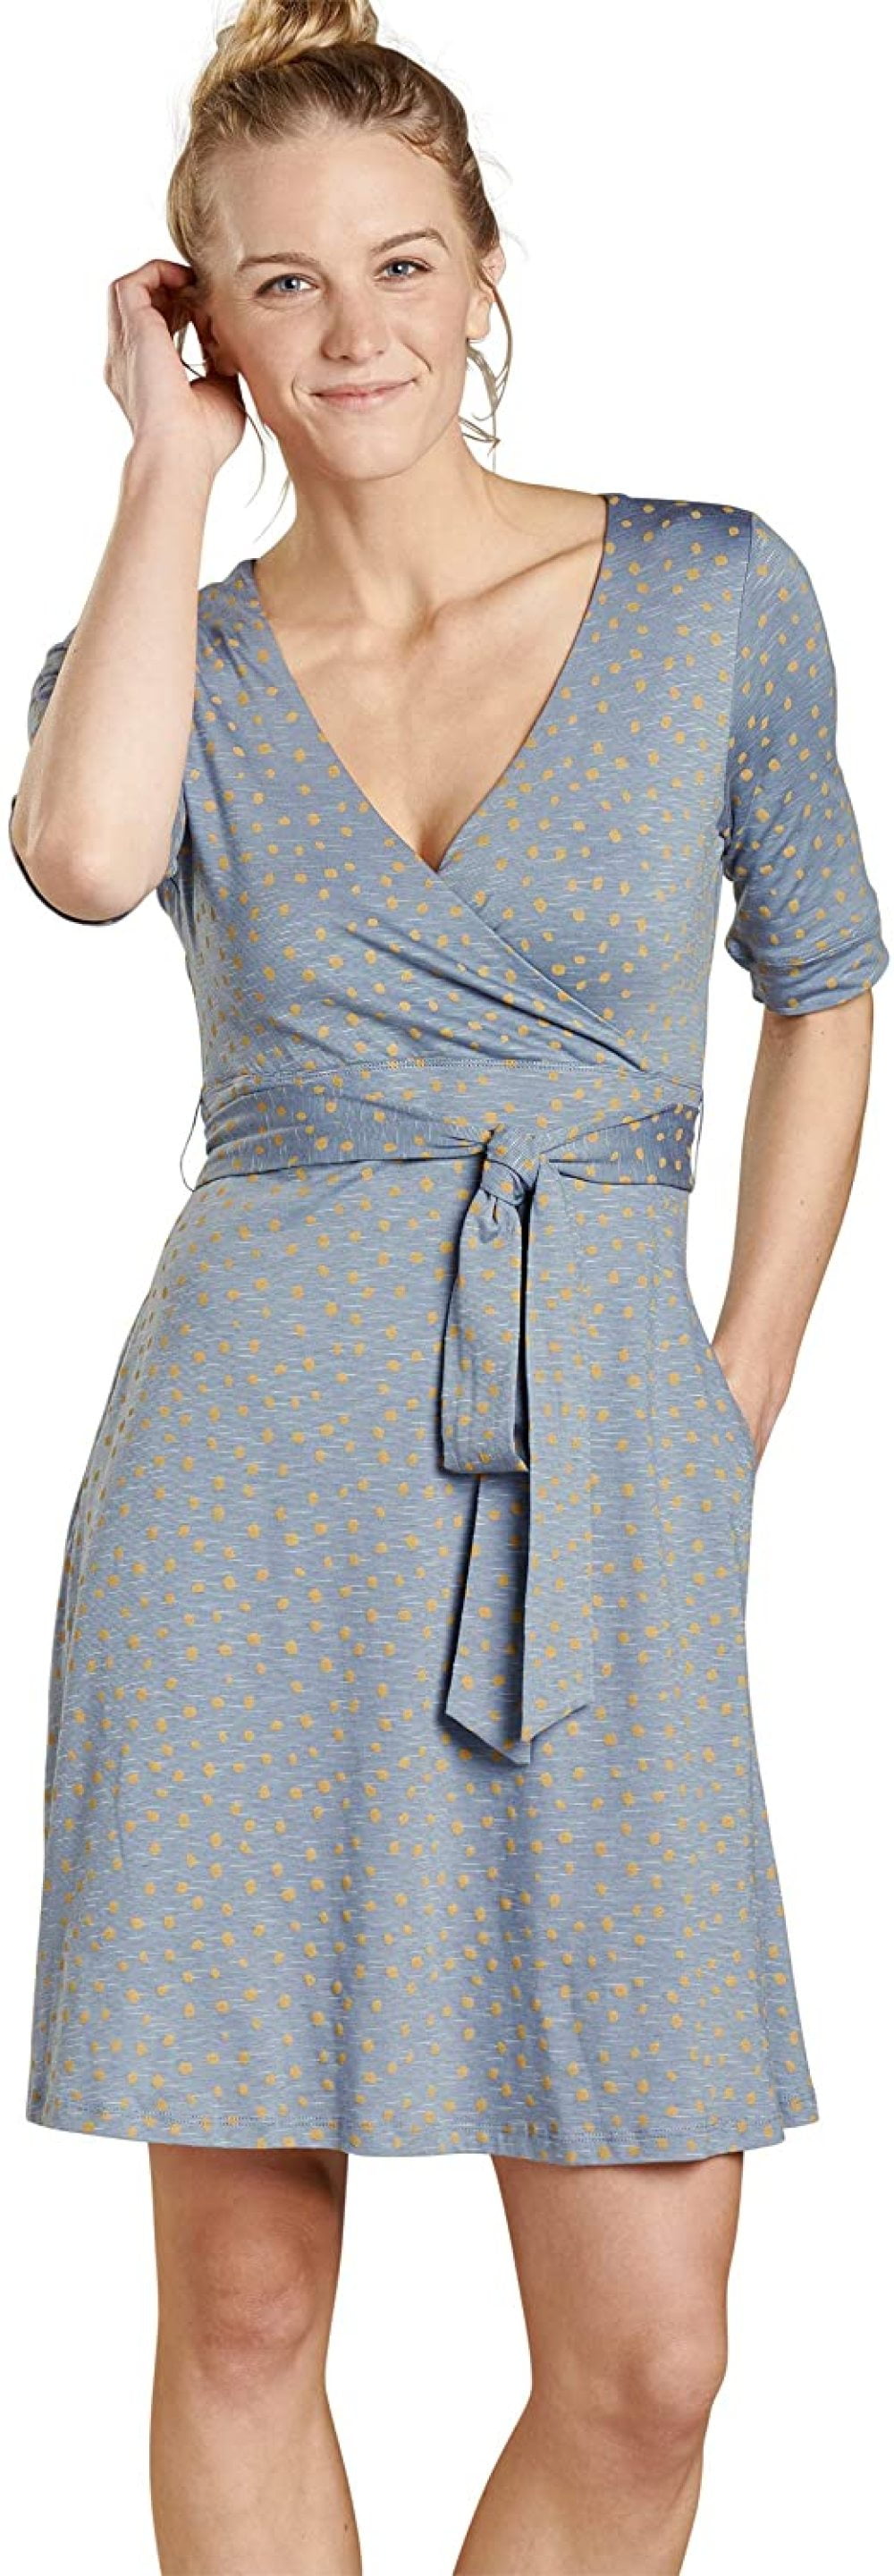 Toad☀Co Womens Cue Wrap Cafe Dress ...